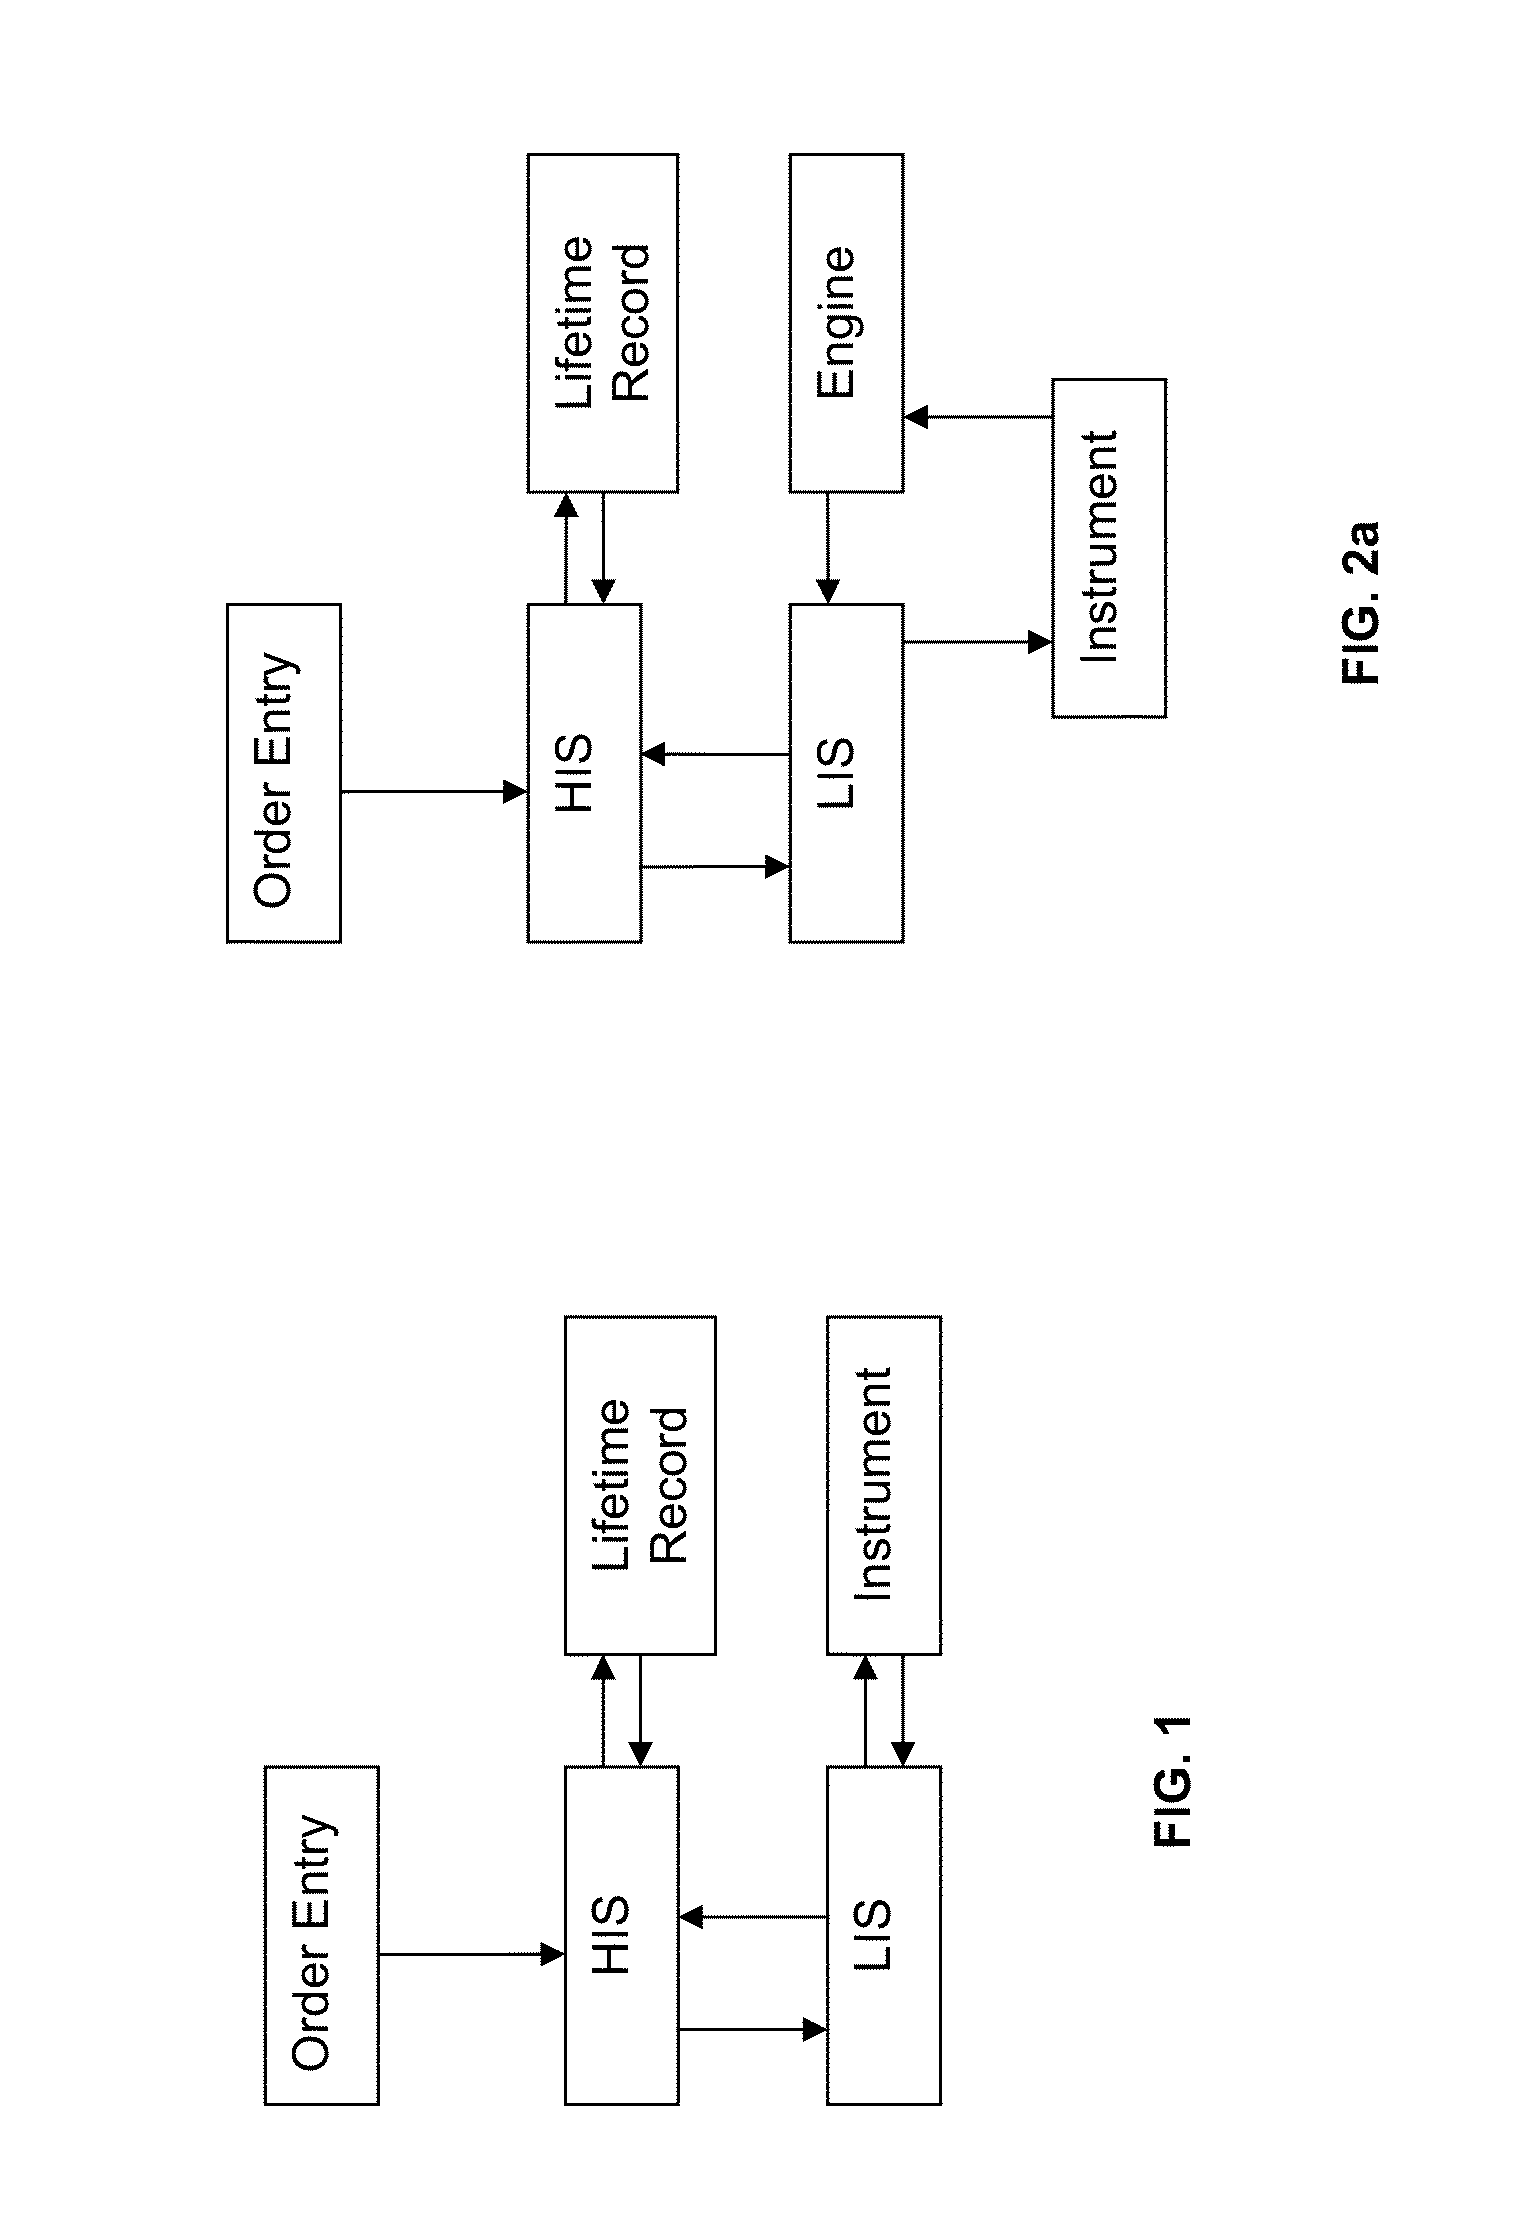 Method for normalizing clinical laboratory measurements